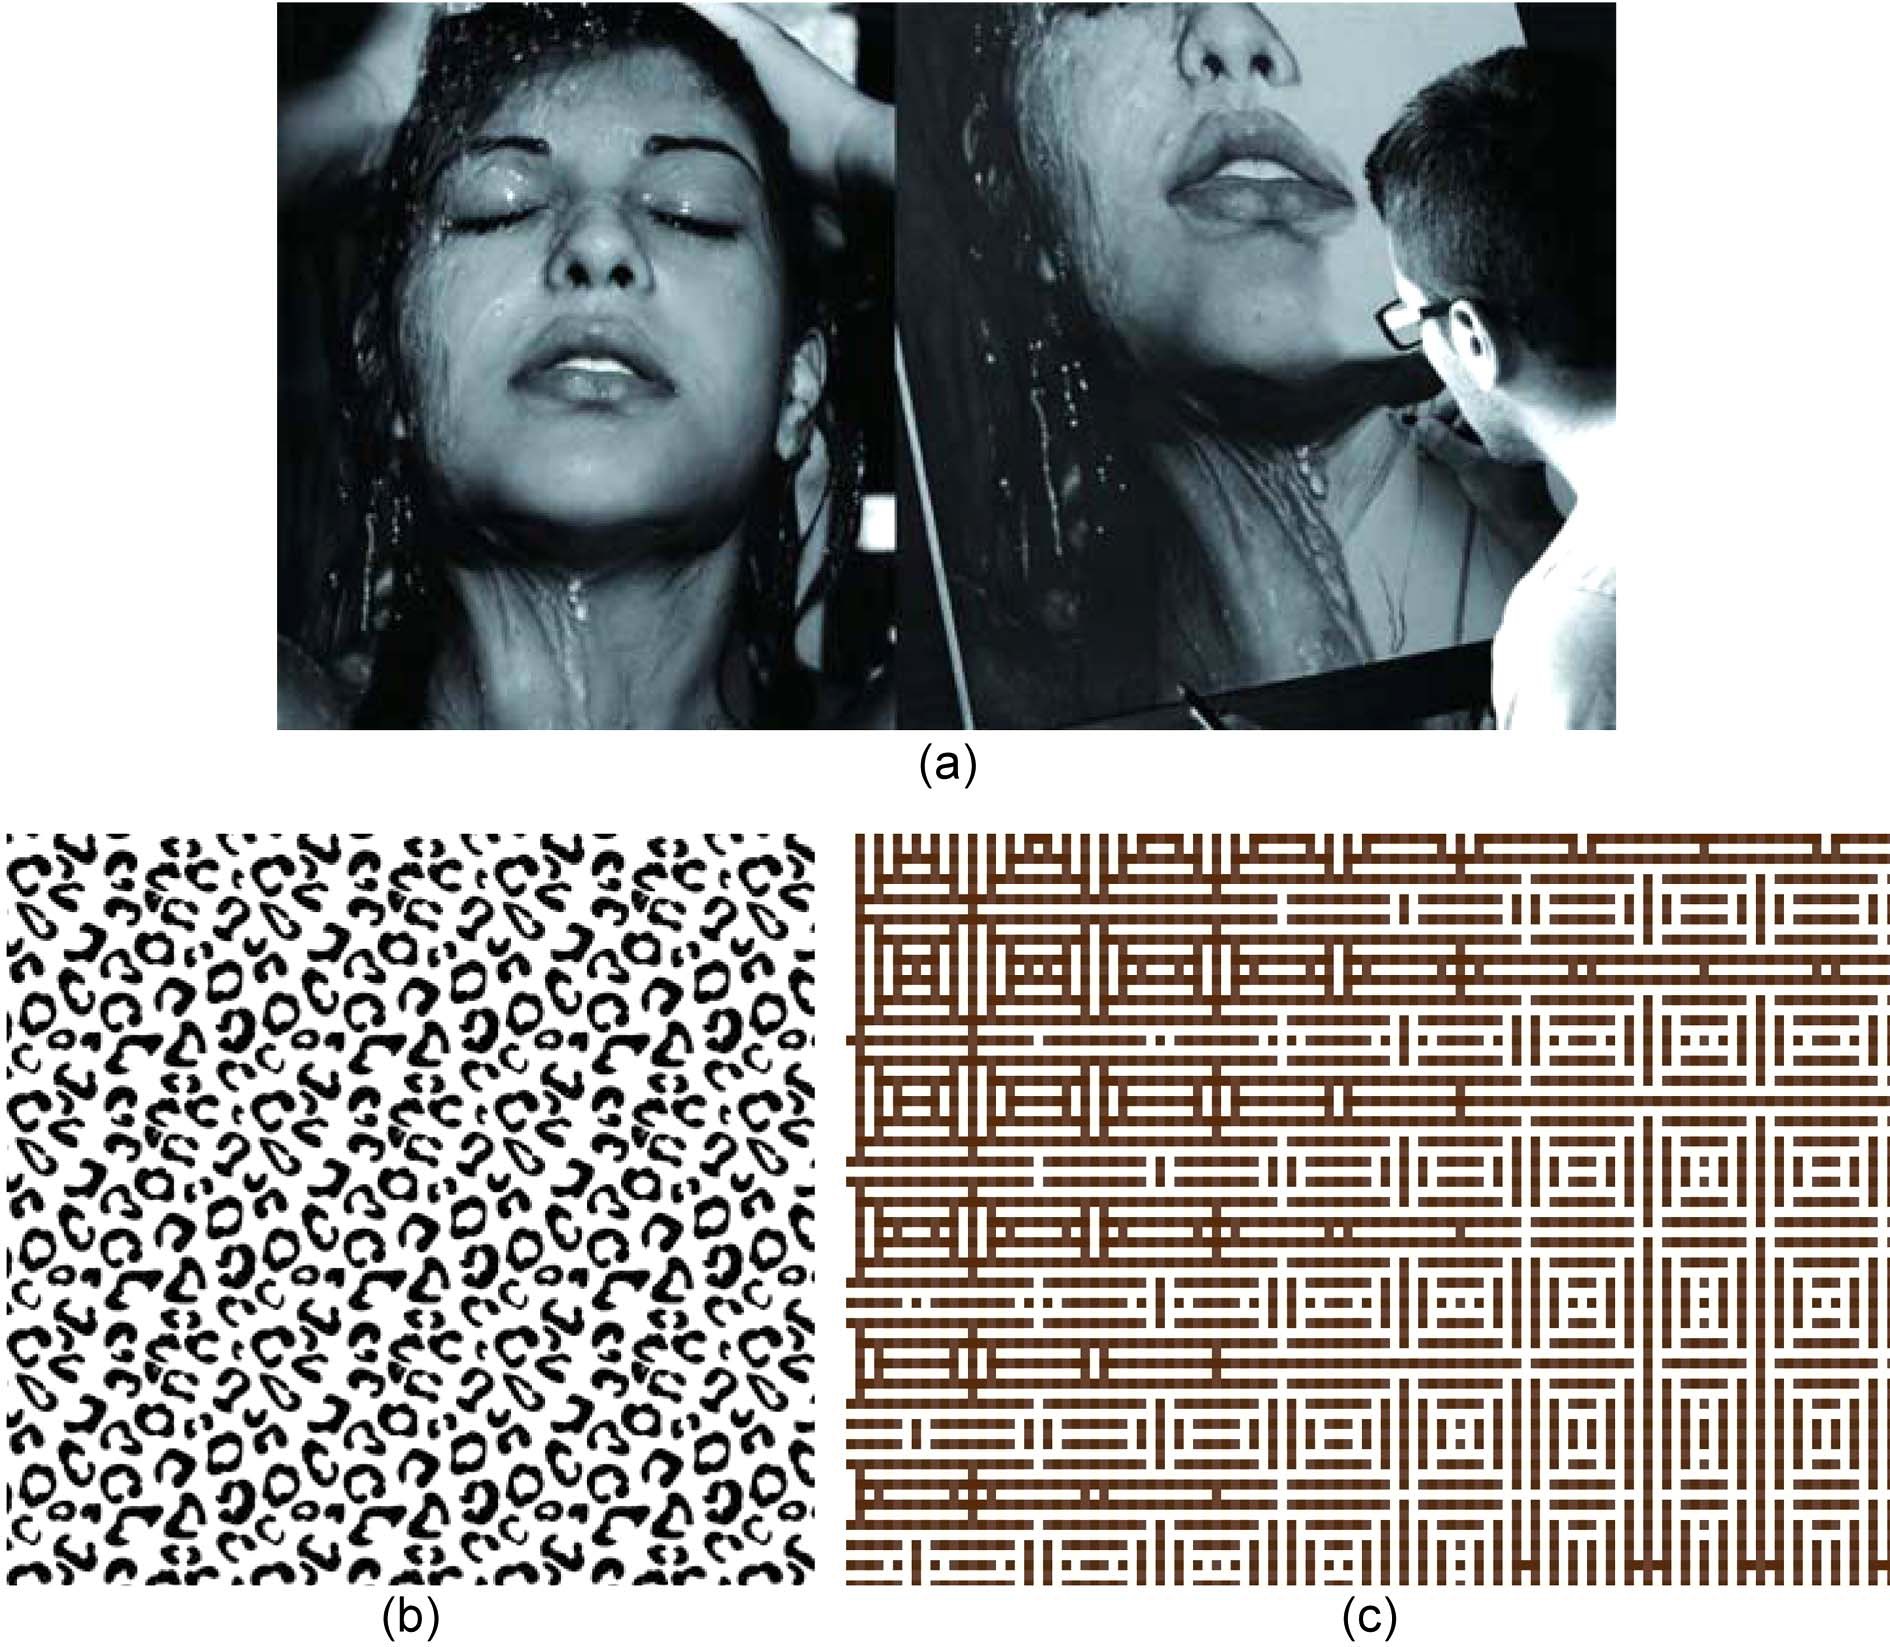 Three types of visual texture. (a) Simulated texture in a photorealistic pencil drawing named Sensazioni by D. Fazio. diegokoi.it, (b) Abstract texture of leopard printing. www.nipic.com, (c) Invented texture. arts.unomaha.edu.